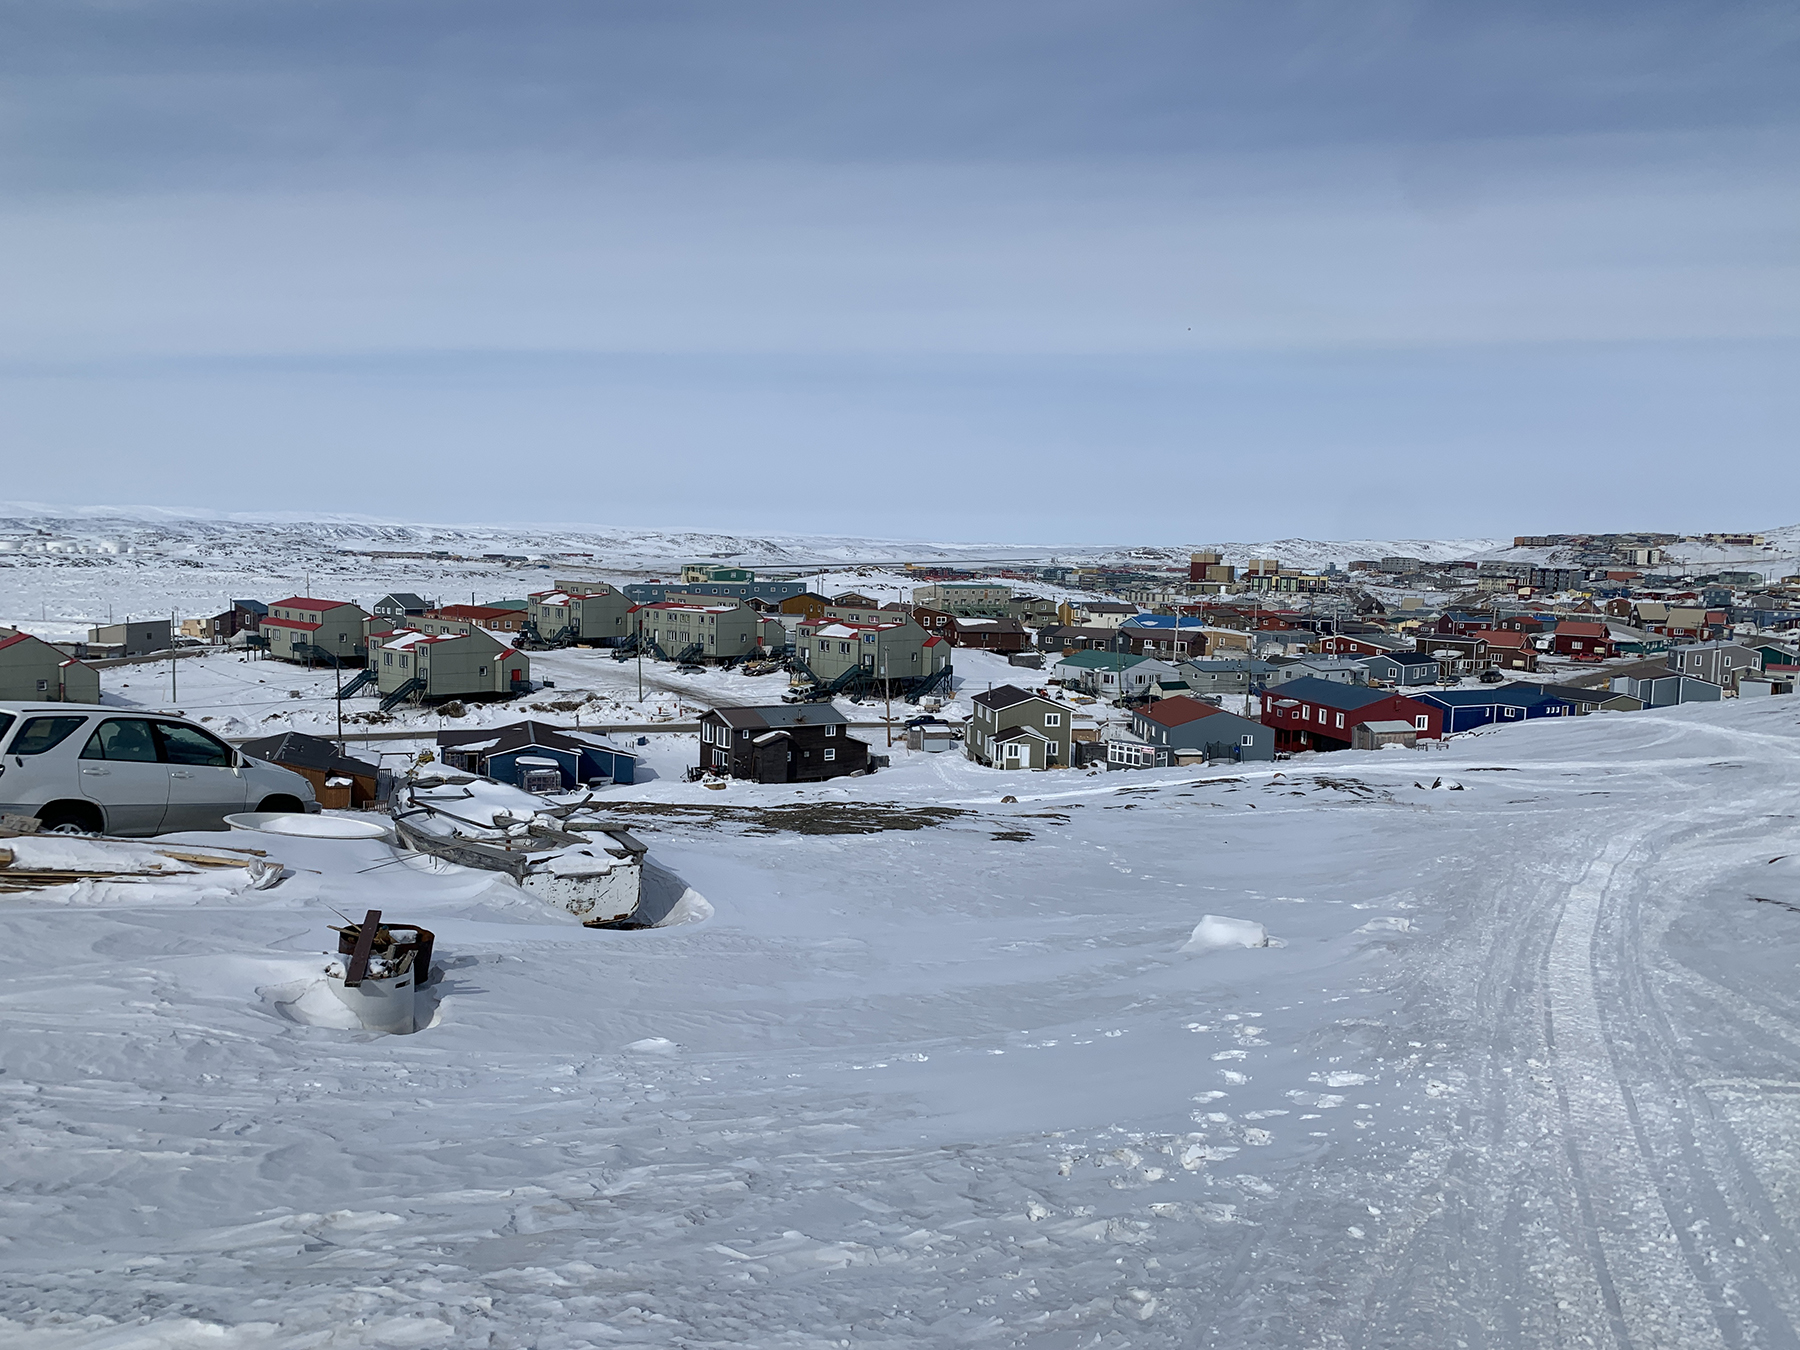 The remote city of Iqaluit, capital of the Canadian territory Nunavut. (Image courtesy of WSP Canada Inc.)